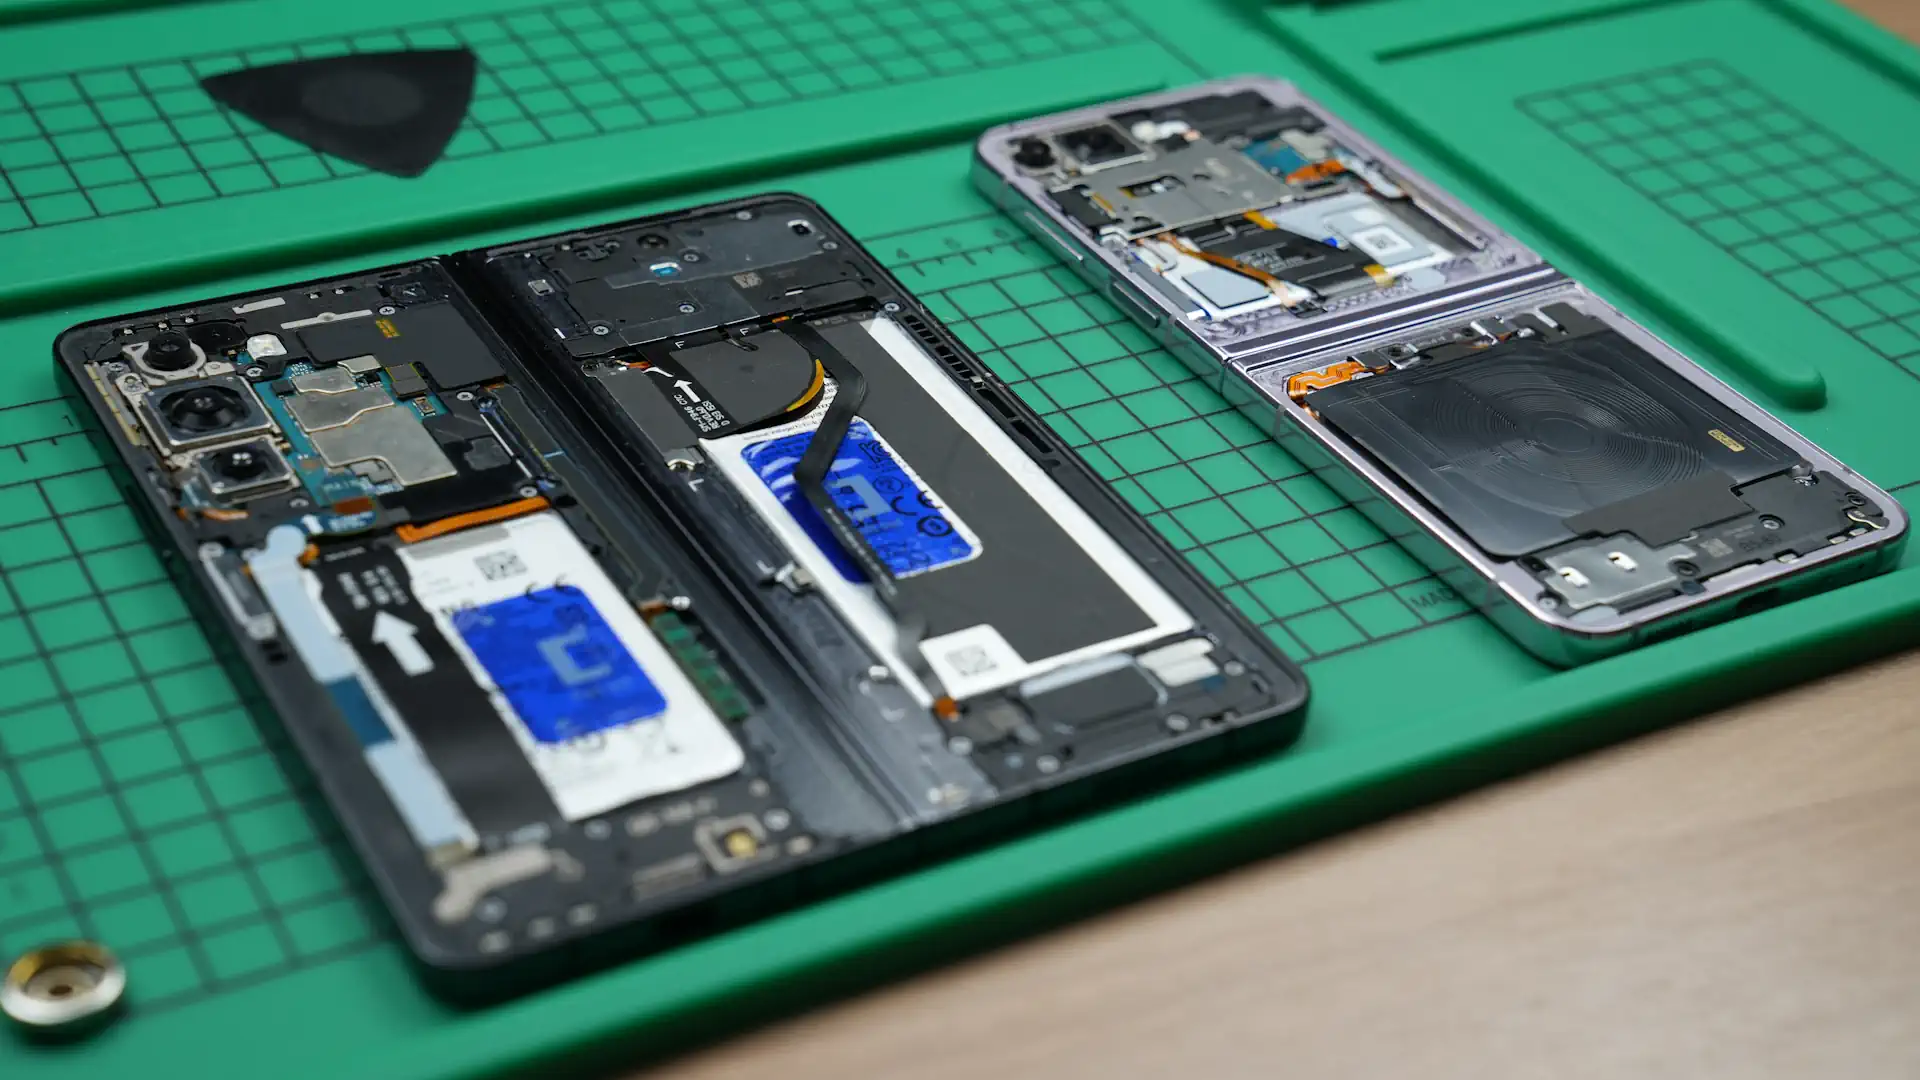 Repair your Samsung device yourself in Serbia: the self-repair program is expanding to new countries and devices